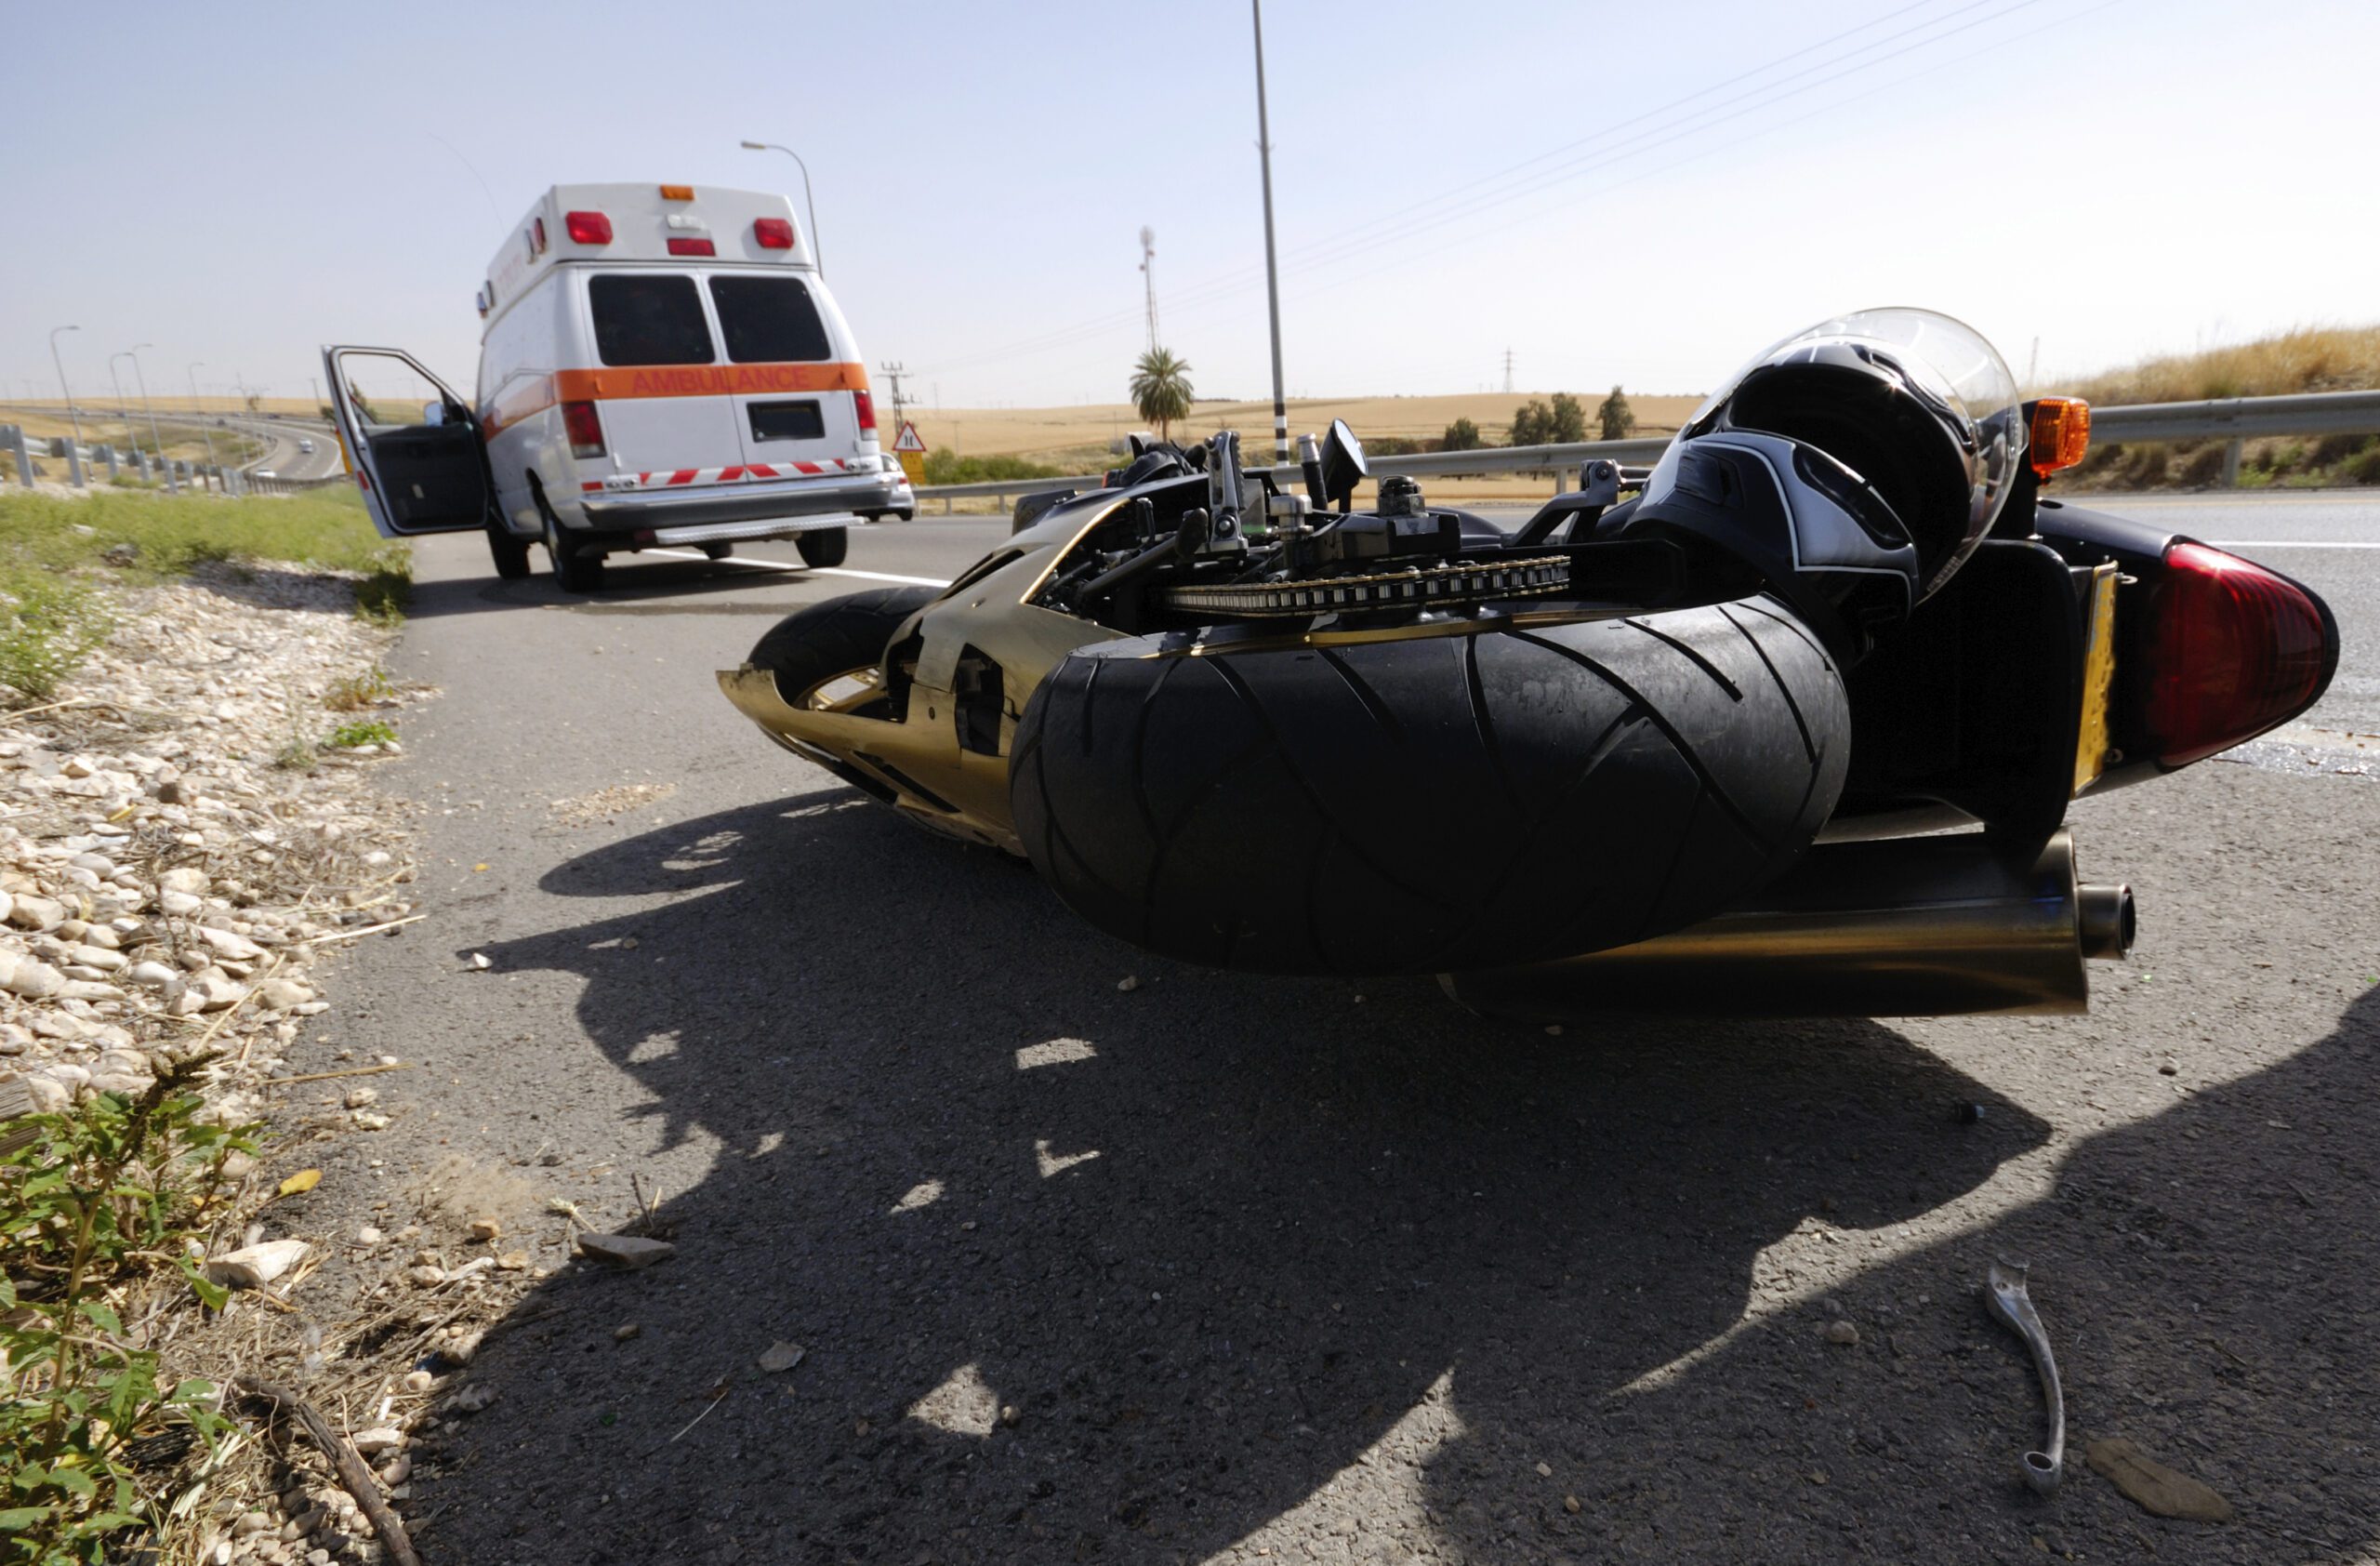 I’ve Been Hurt in a Motorcycle Accident in Las Vegas – Do I Need a Lawyer?